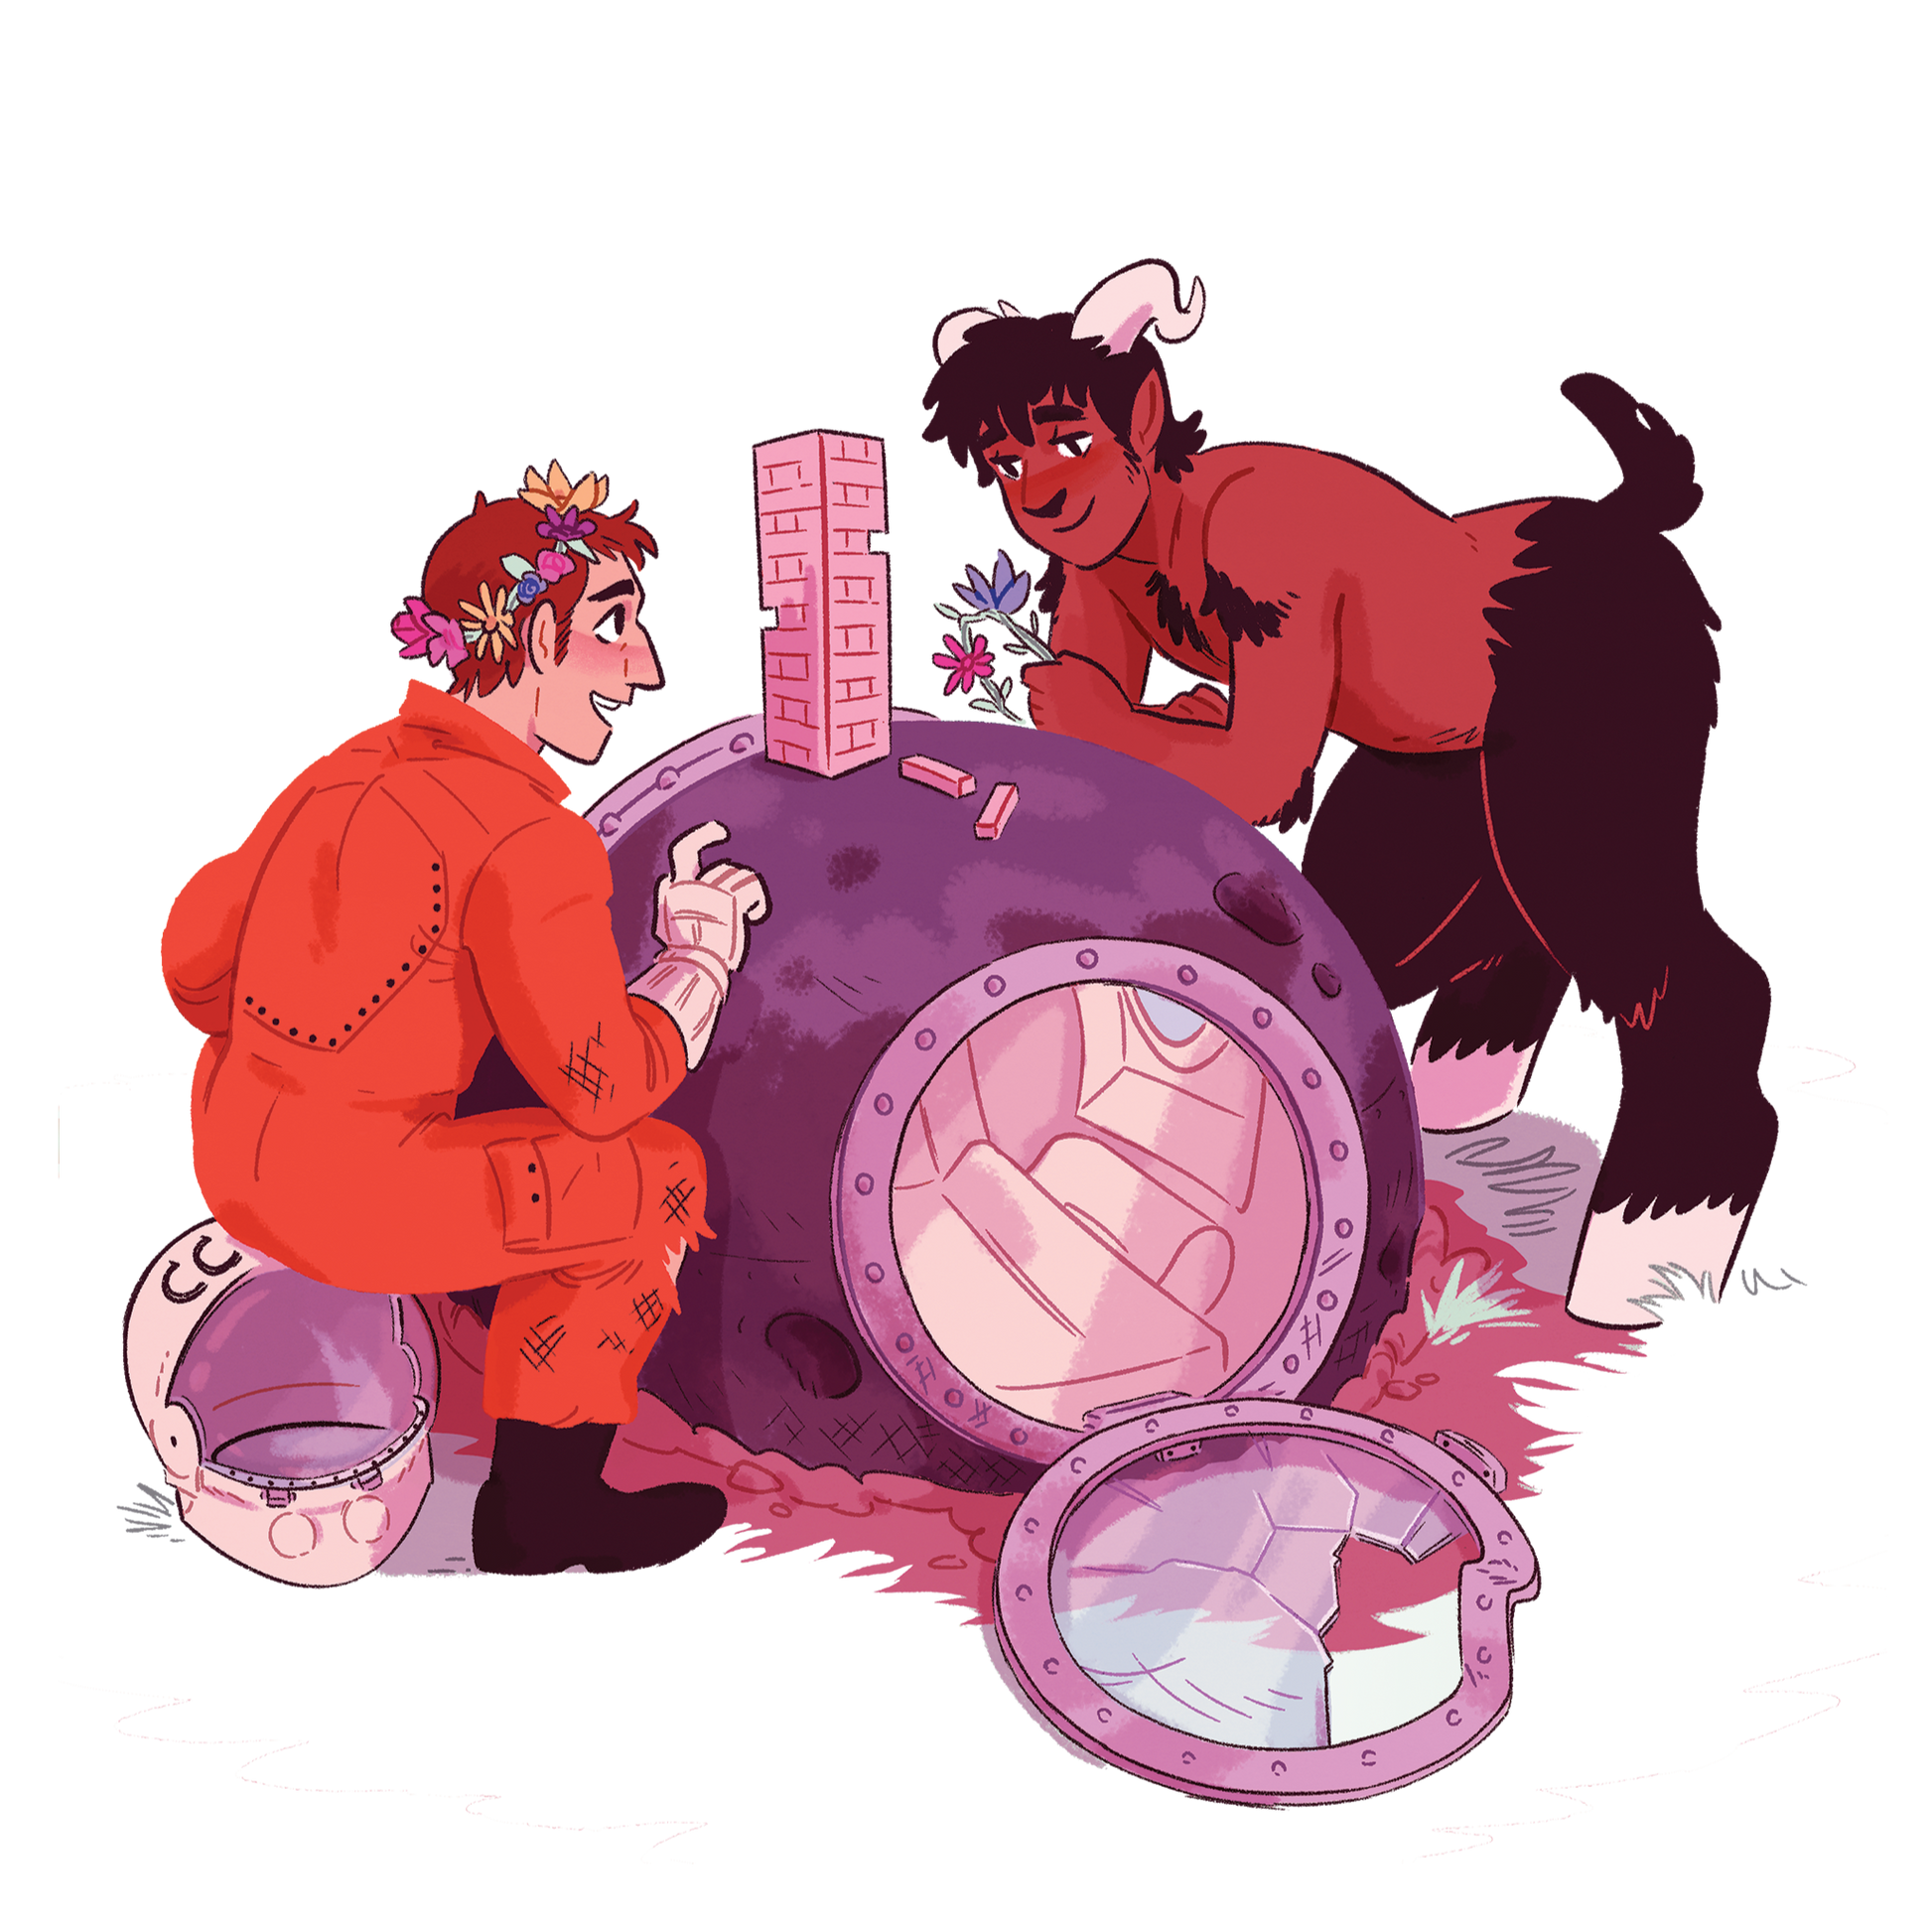 A cosmonaut and a faun play jenga on a crashed spaceship